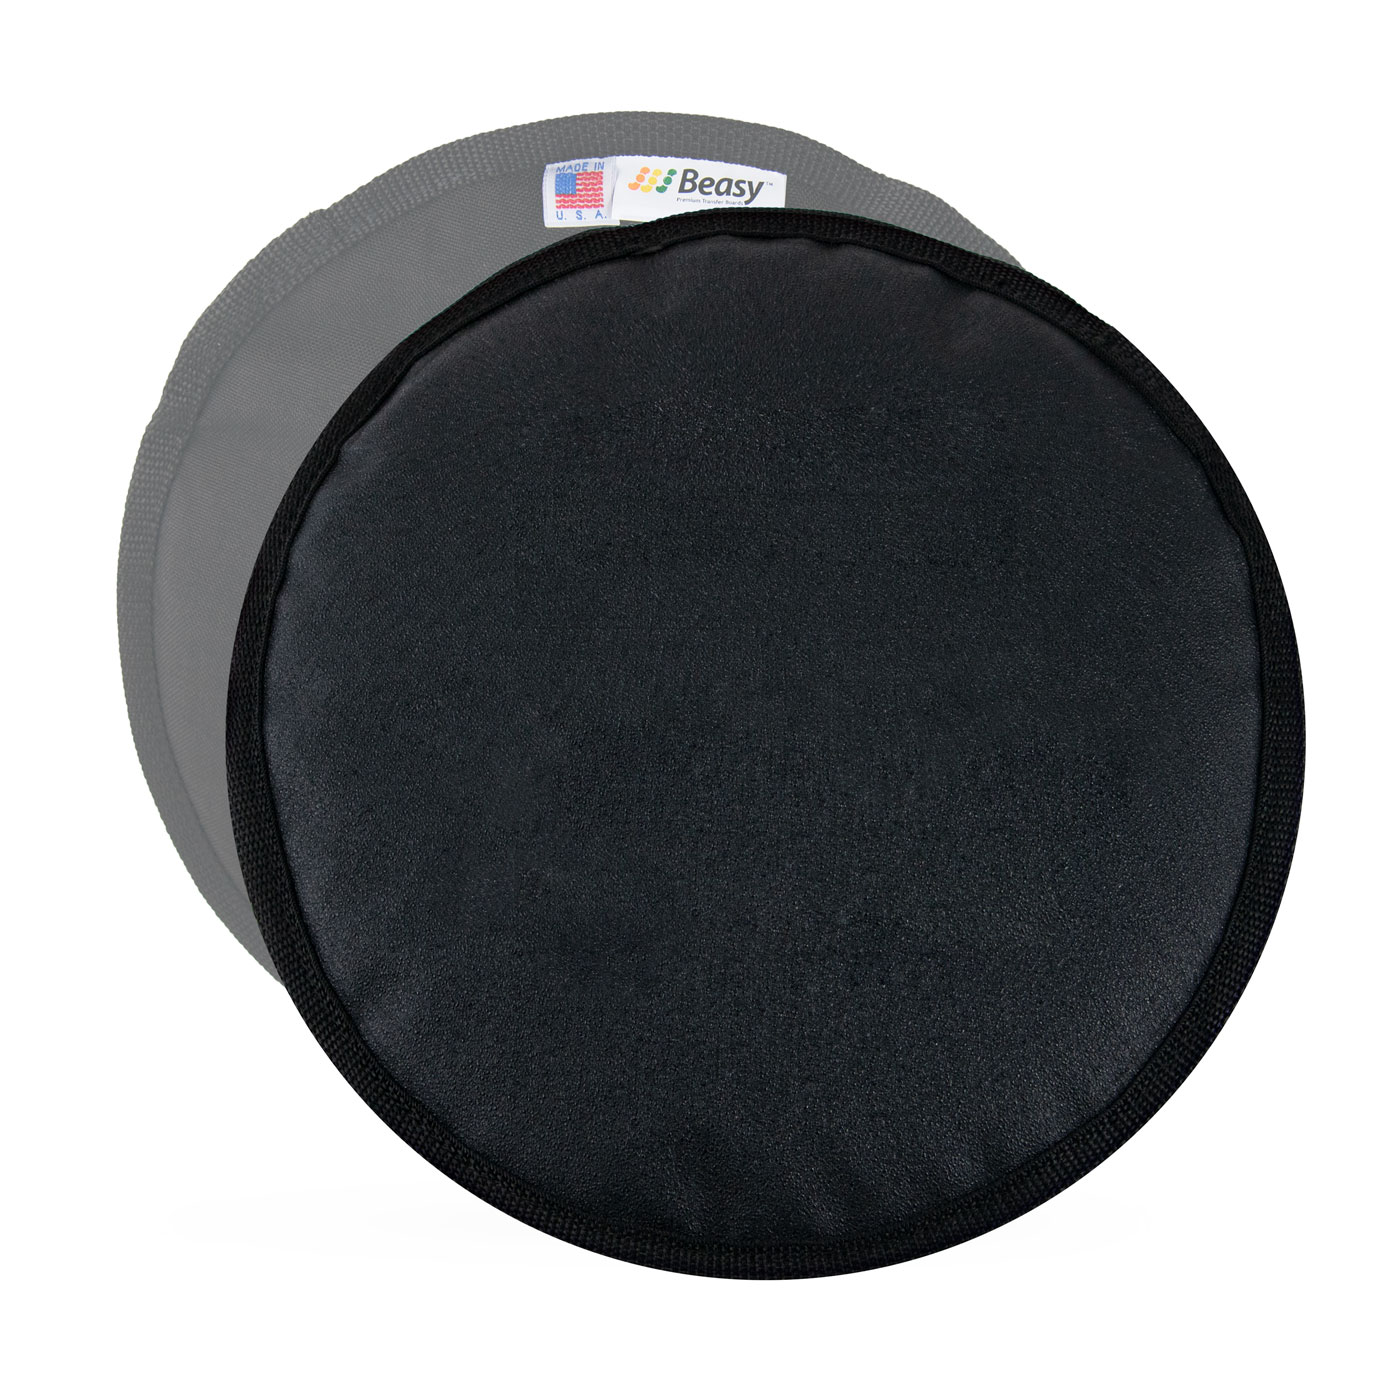 Beasy Seat Pad without velcro kit